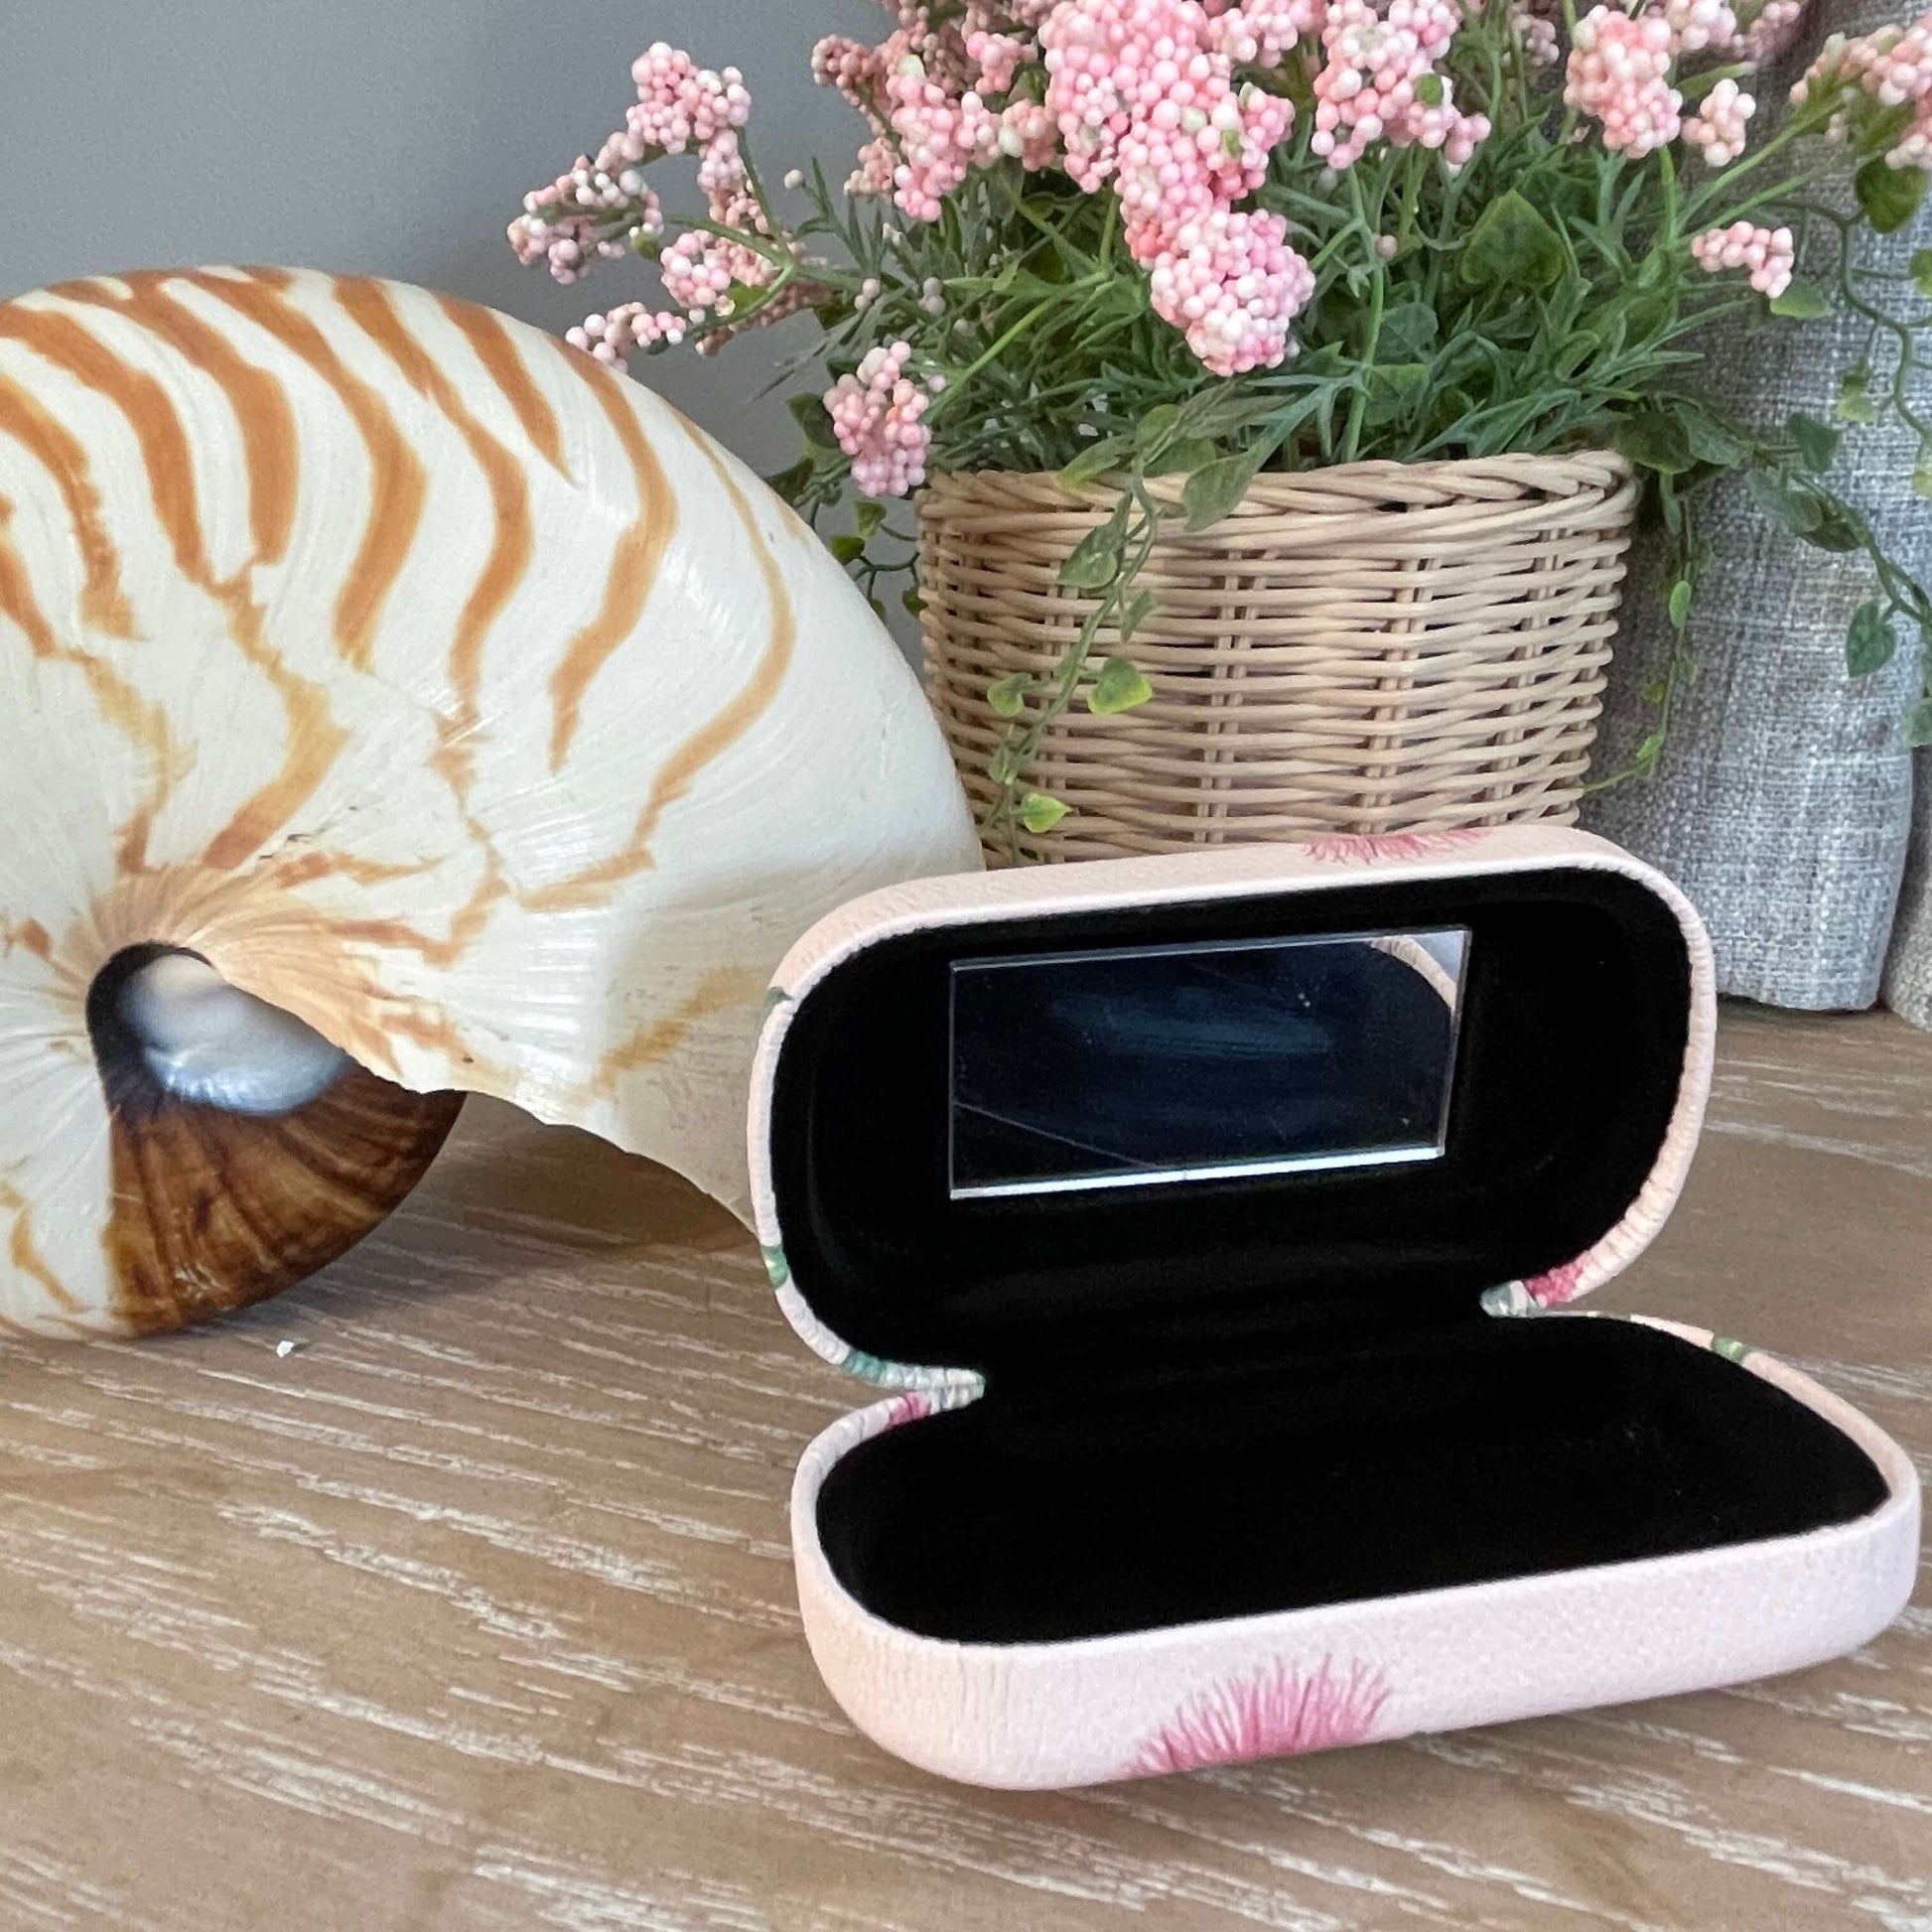  Small trinket case opened showing the mirror and black lining sitting on a table with a large shell and faux pot plant.